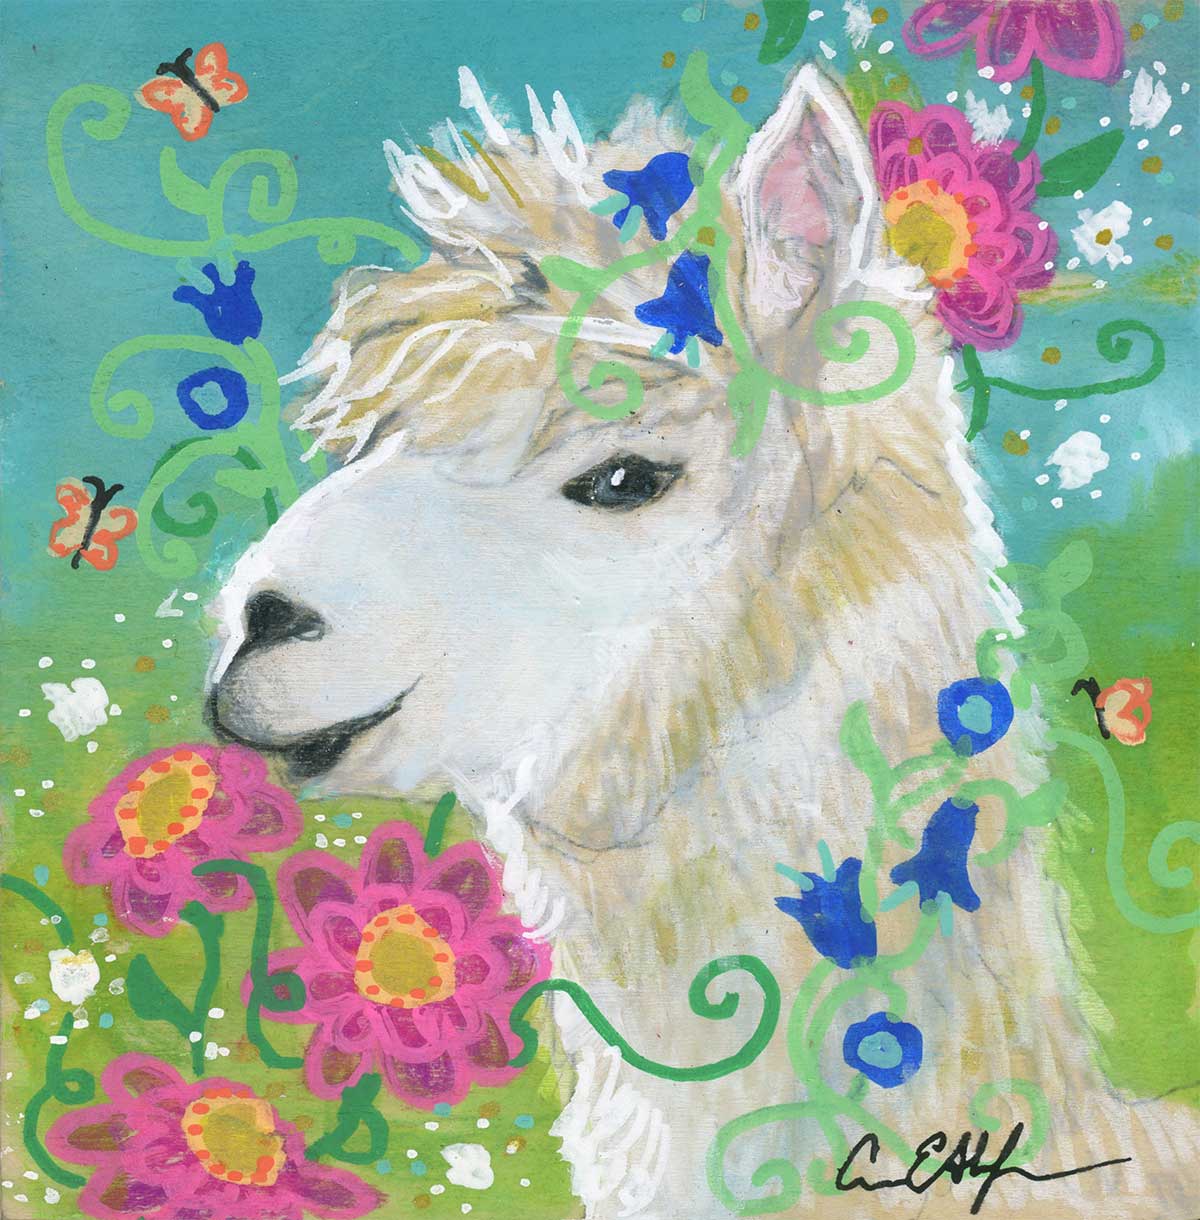 SOLD - "Llama and Pink Flowers", 4" x 4", mixed media